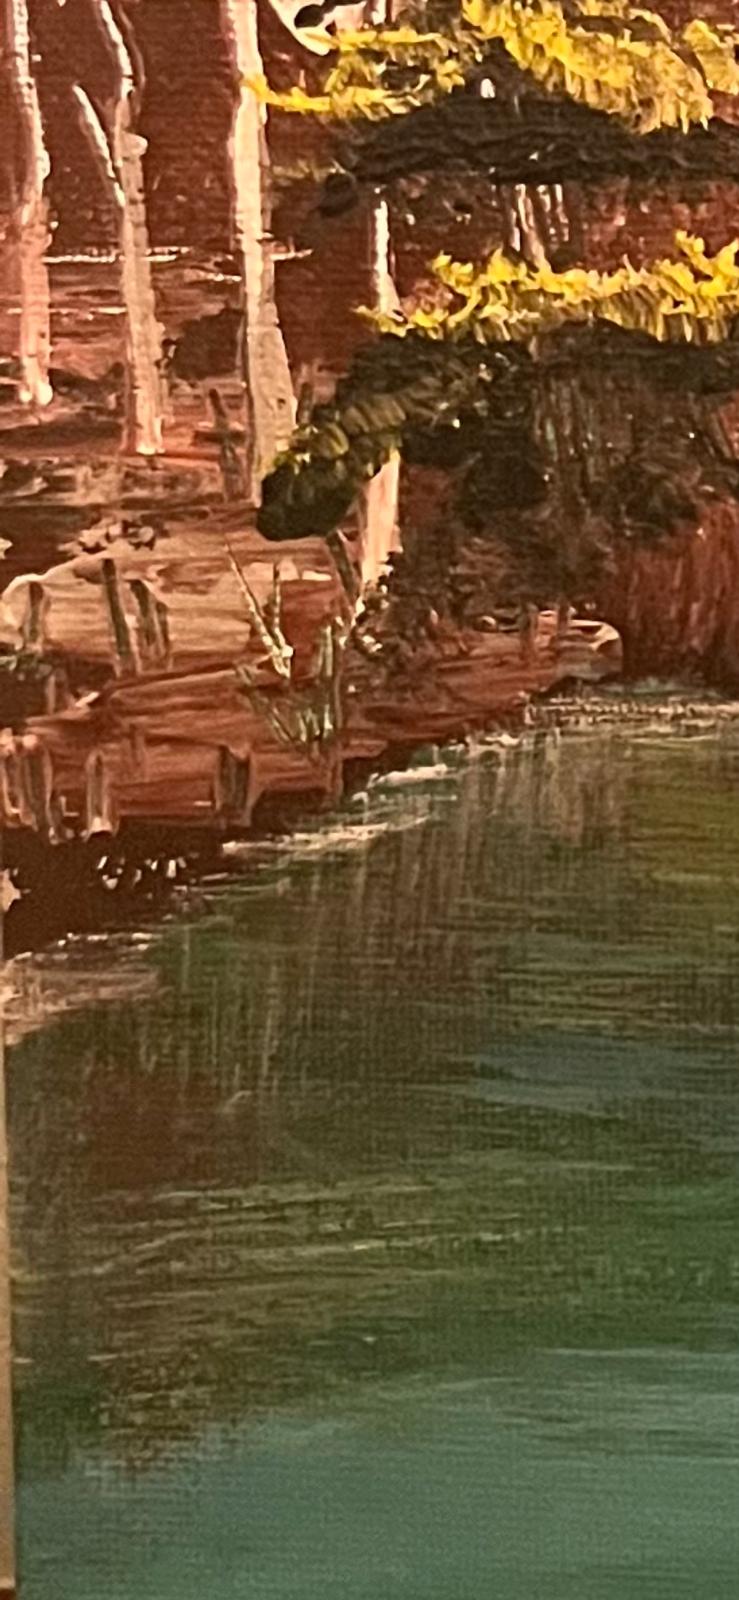 A Tennessee River Acrylic on Canvas